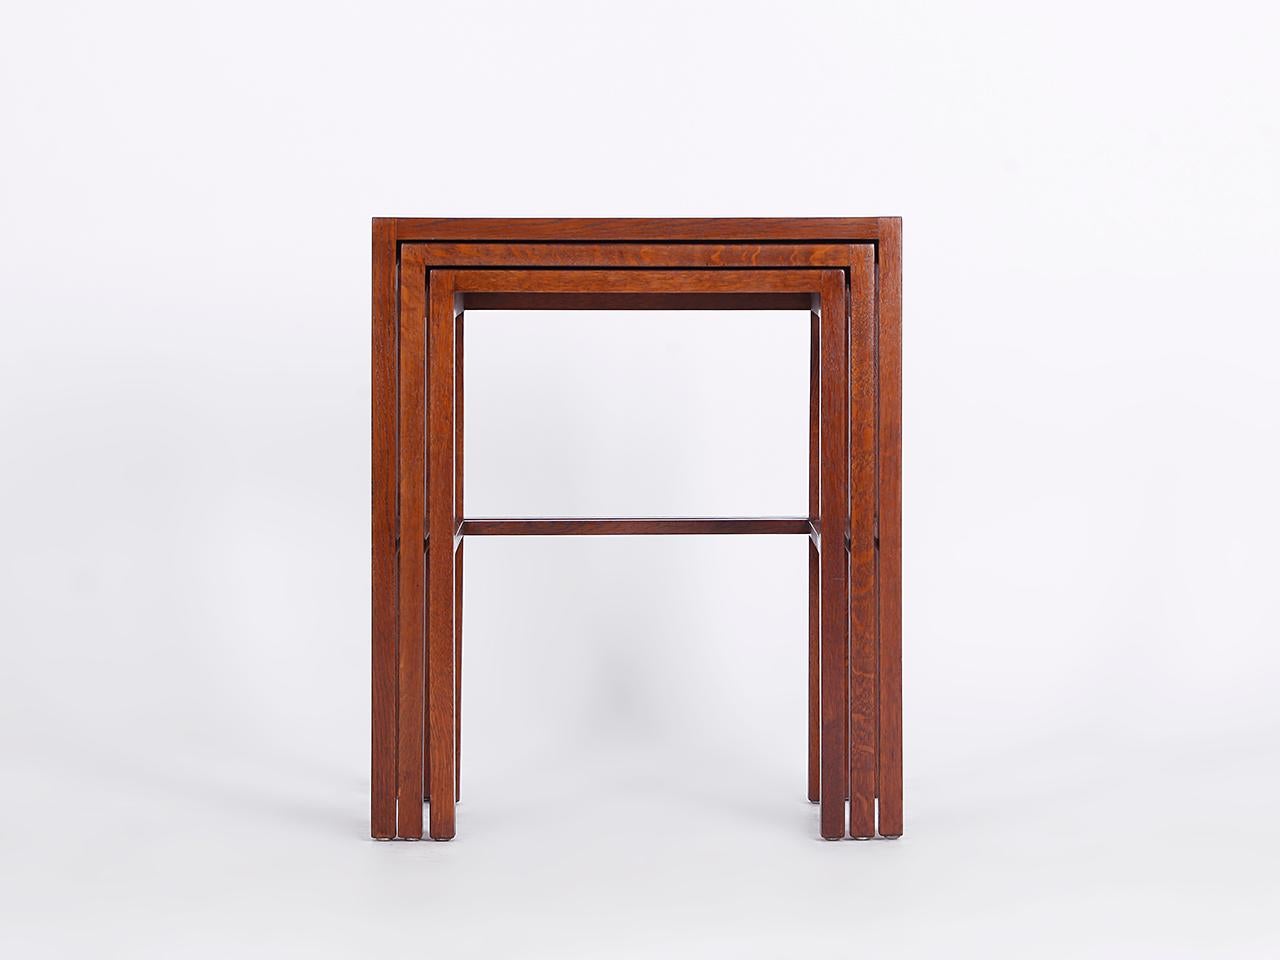 A set of three nesting tables, model no. 50, designed by Jindrich Halabala for UP Zavody, Brno in the 1930s. Dark stained and laquered beech, dark brown Bakelite tops measures: 
Measures: height: 65, 62, 60 cm
width: 55, 49, 43cm
depth: 40, 38,